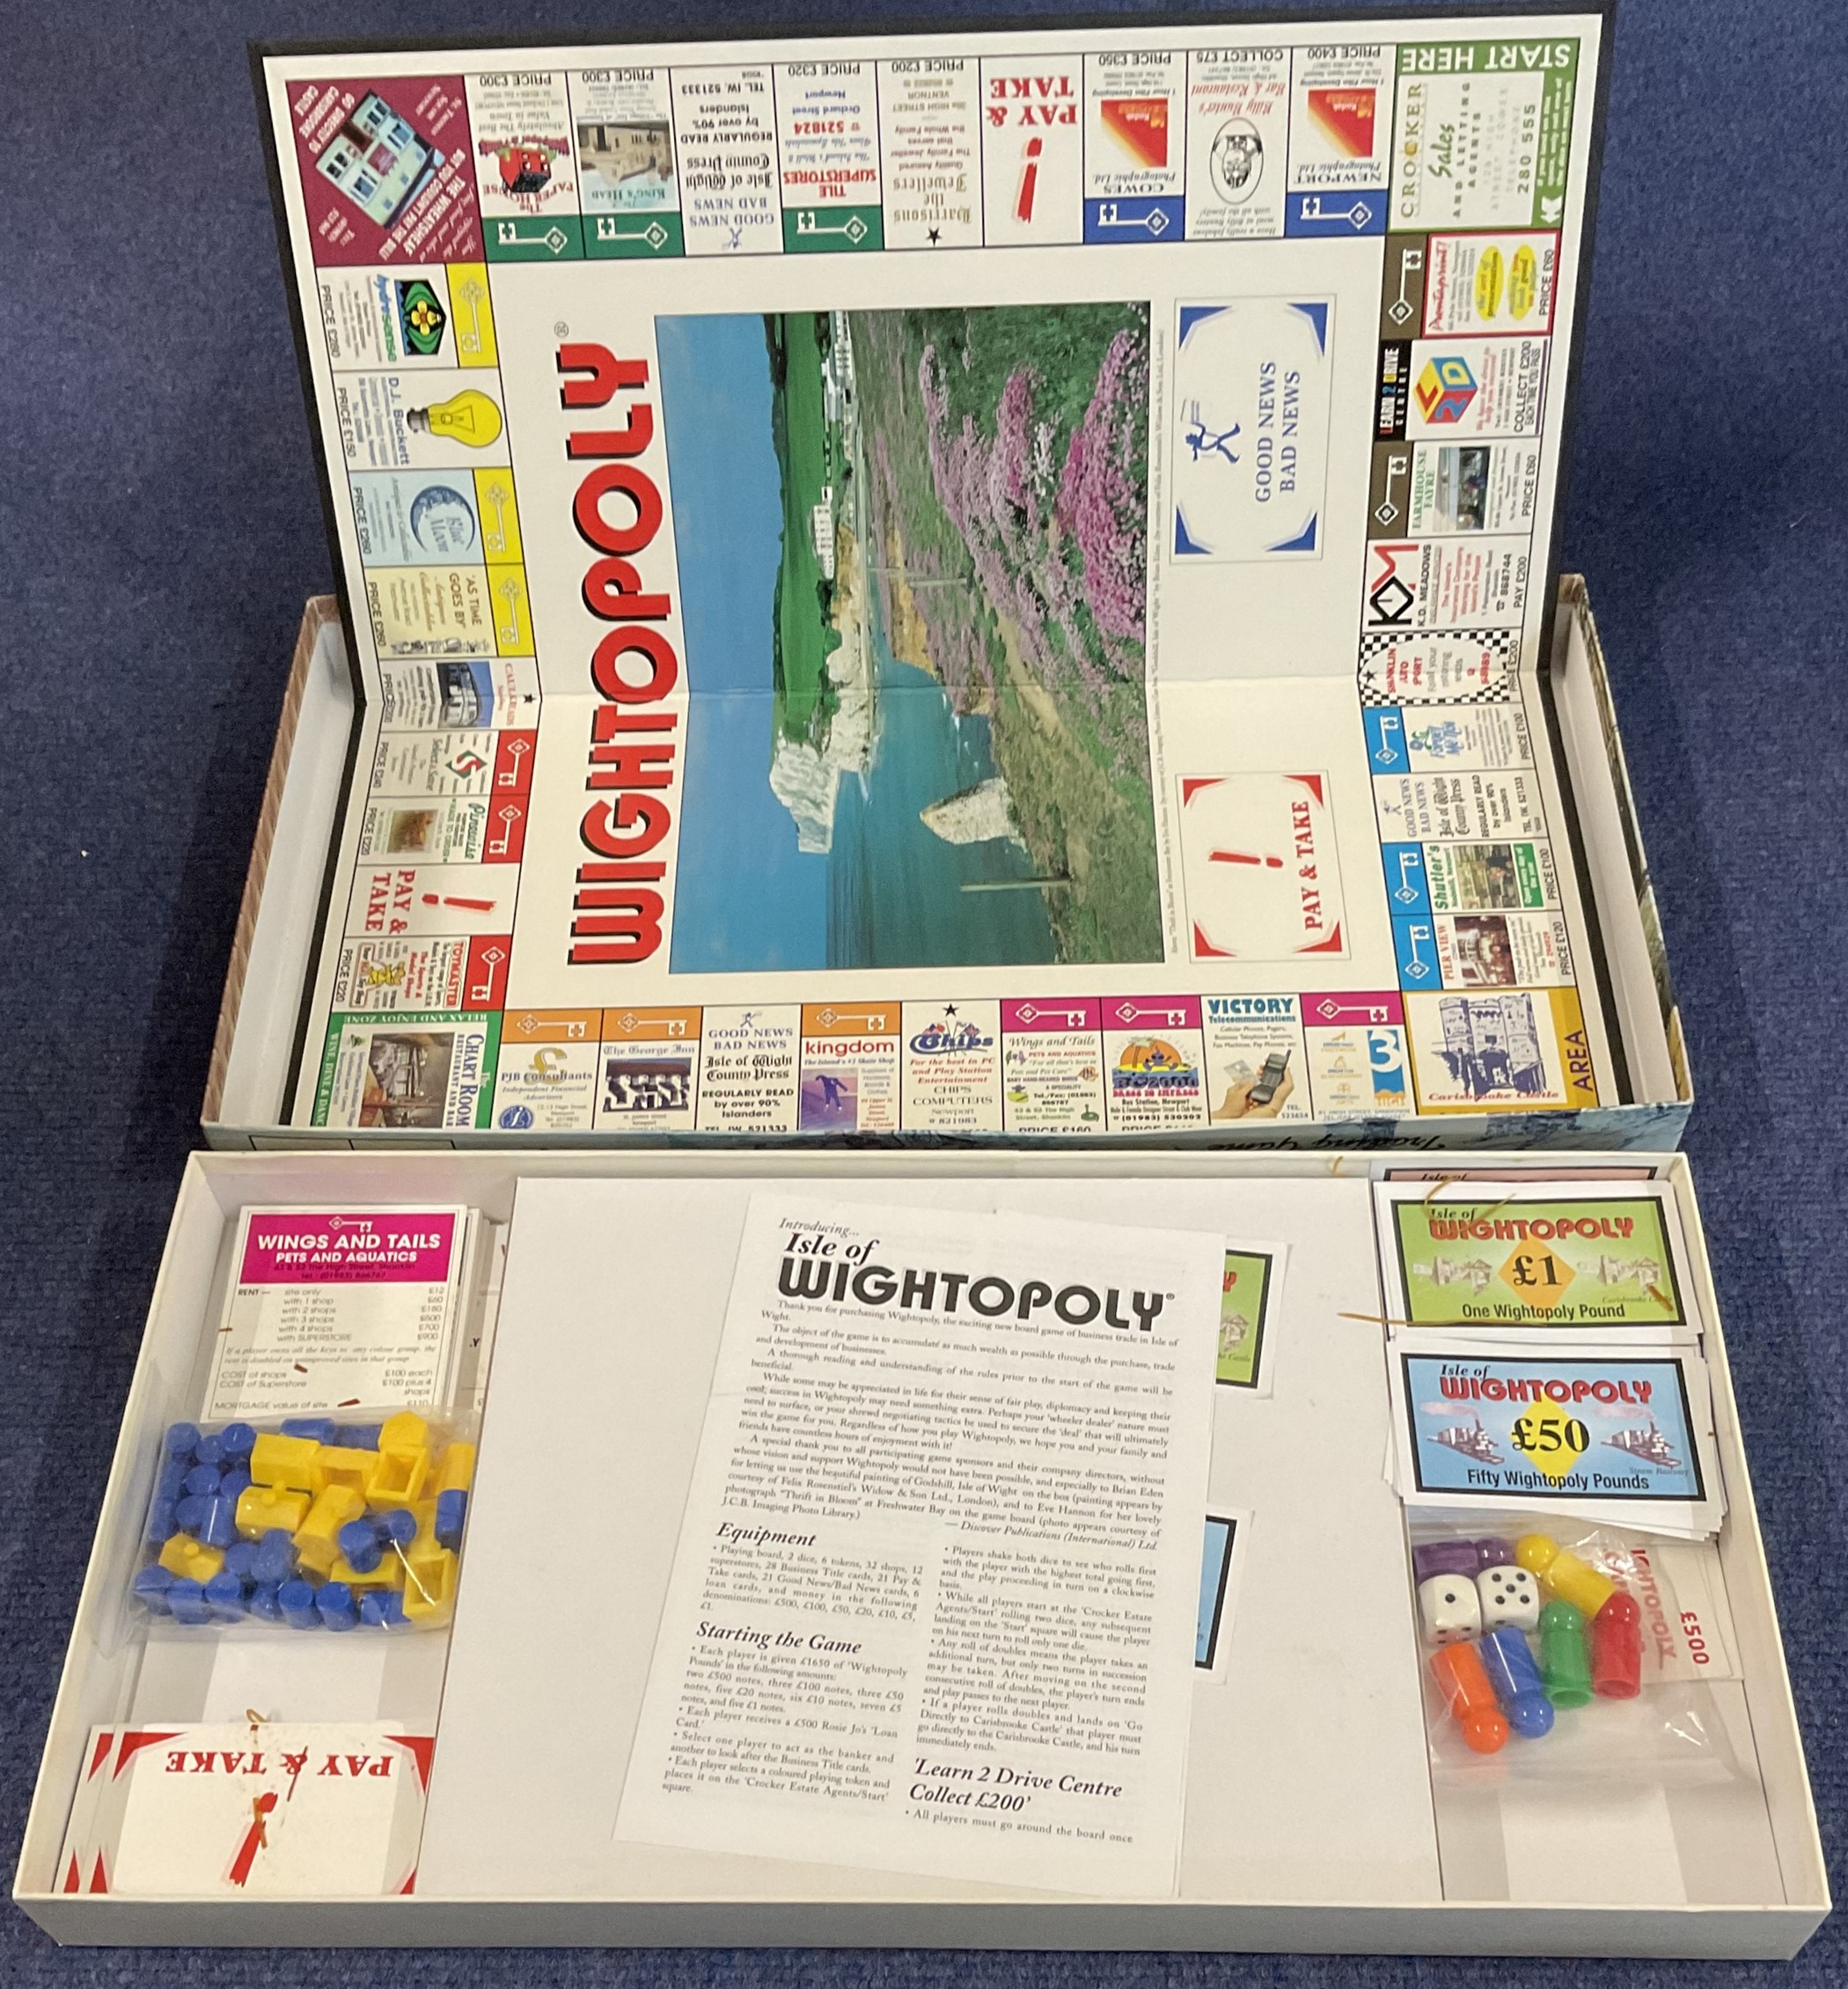 Wightopoly. Isle of Wight's Business Trading Game. Produced in 1998 in International Ltd - Image 2 of 2